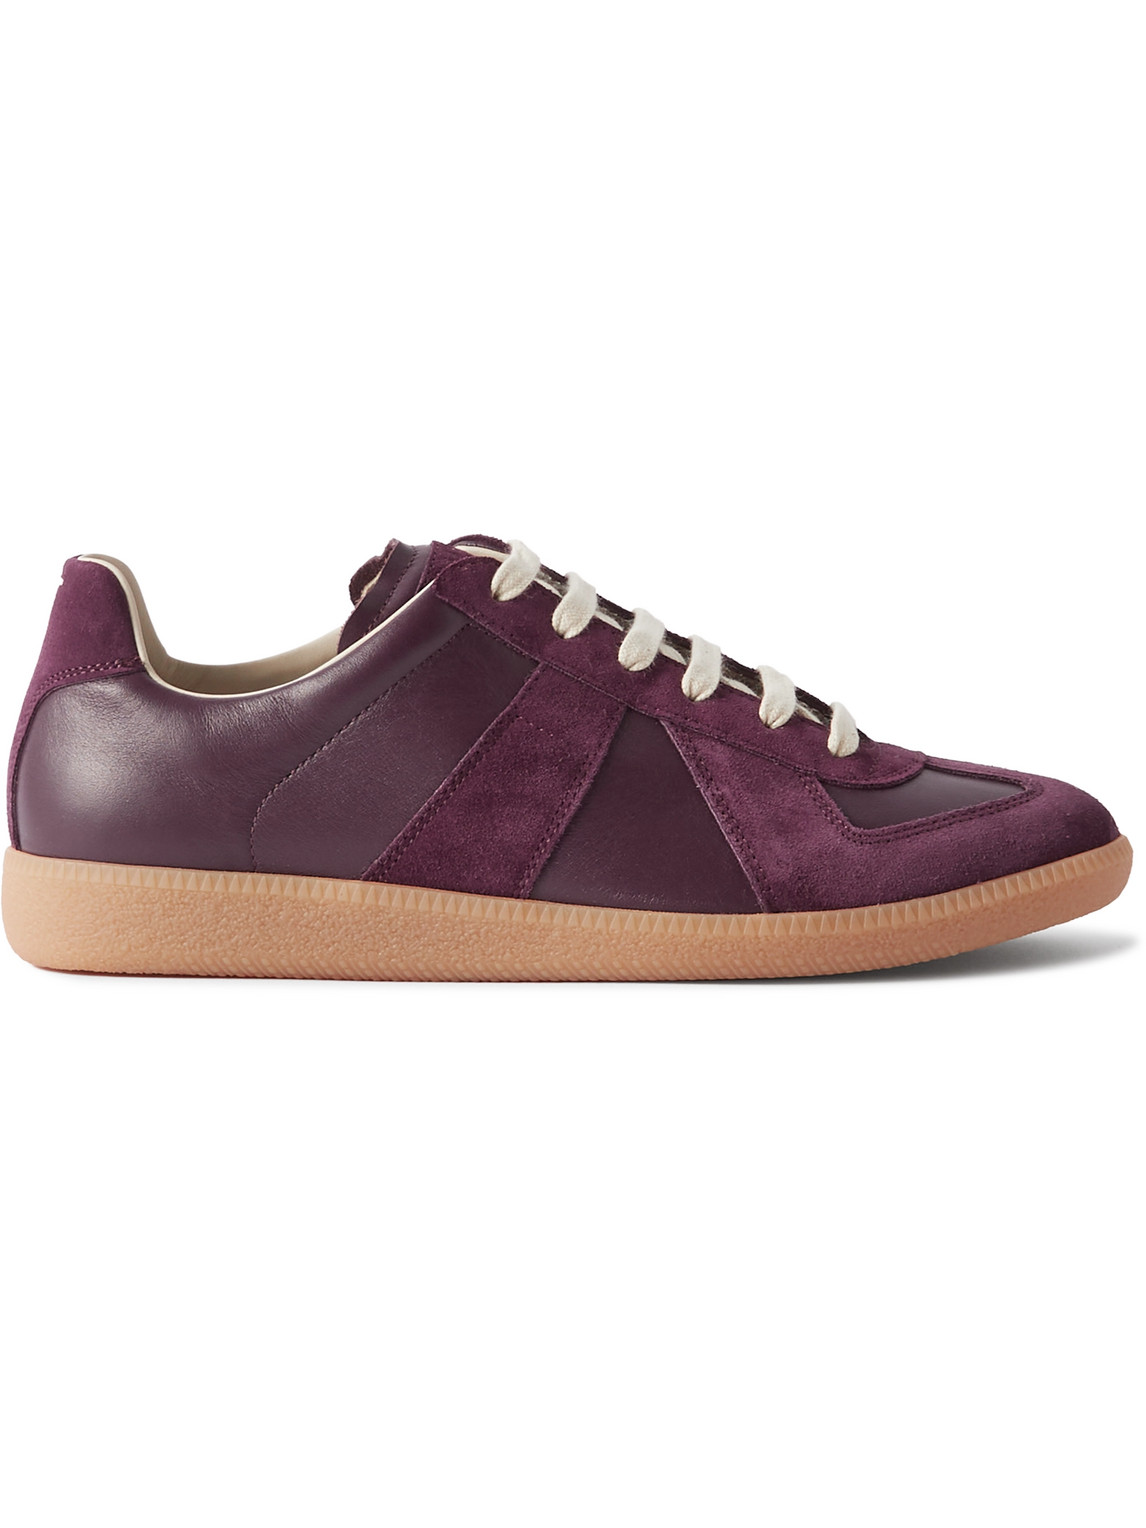 Shop Maison Margiela Replica Leather And Suede Sneakers In Burgundy